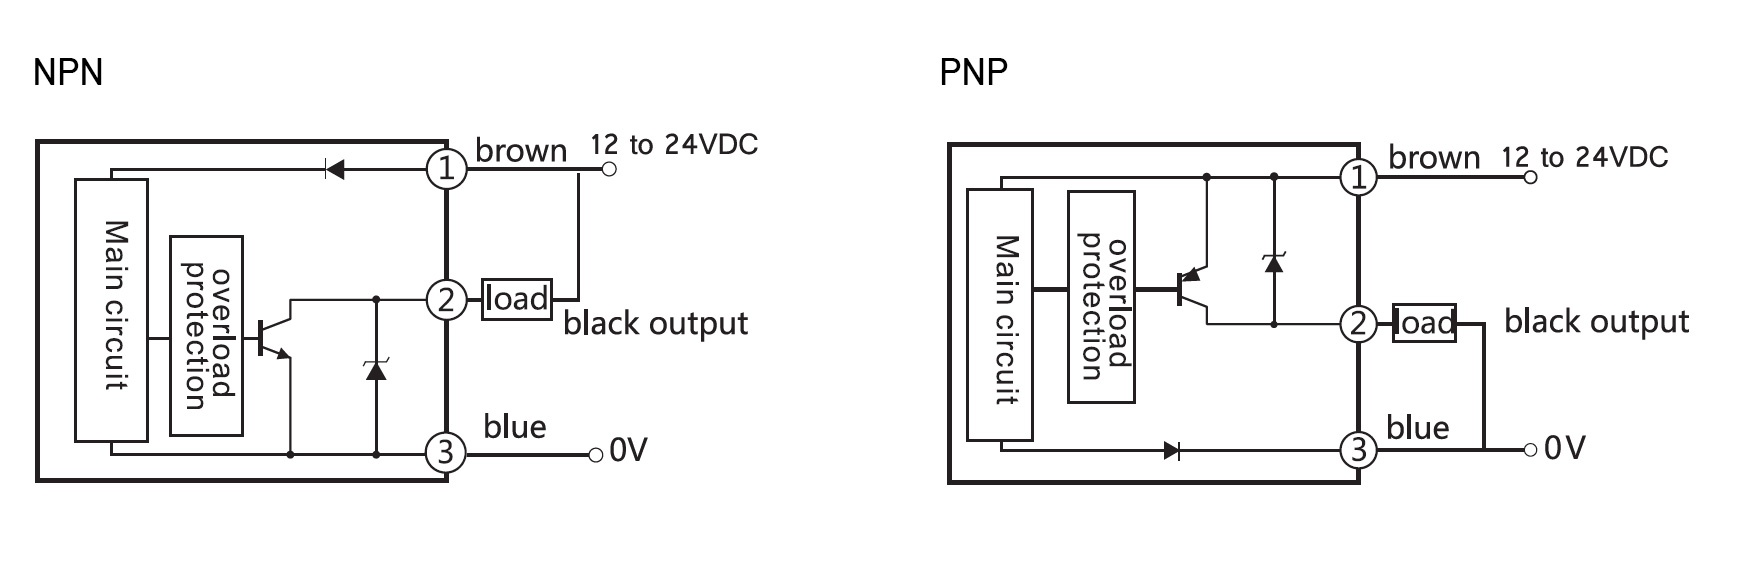 3 WIRING FOR PHOTOELECTRIC SENSOR